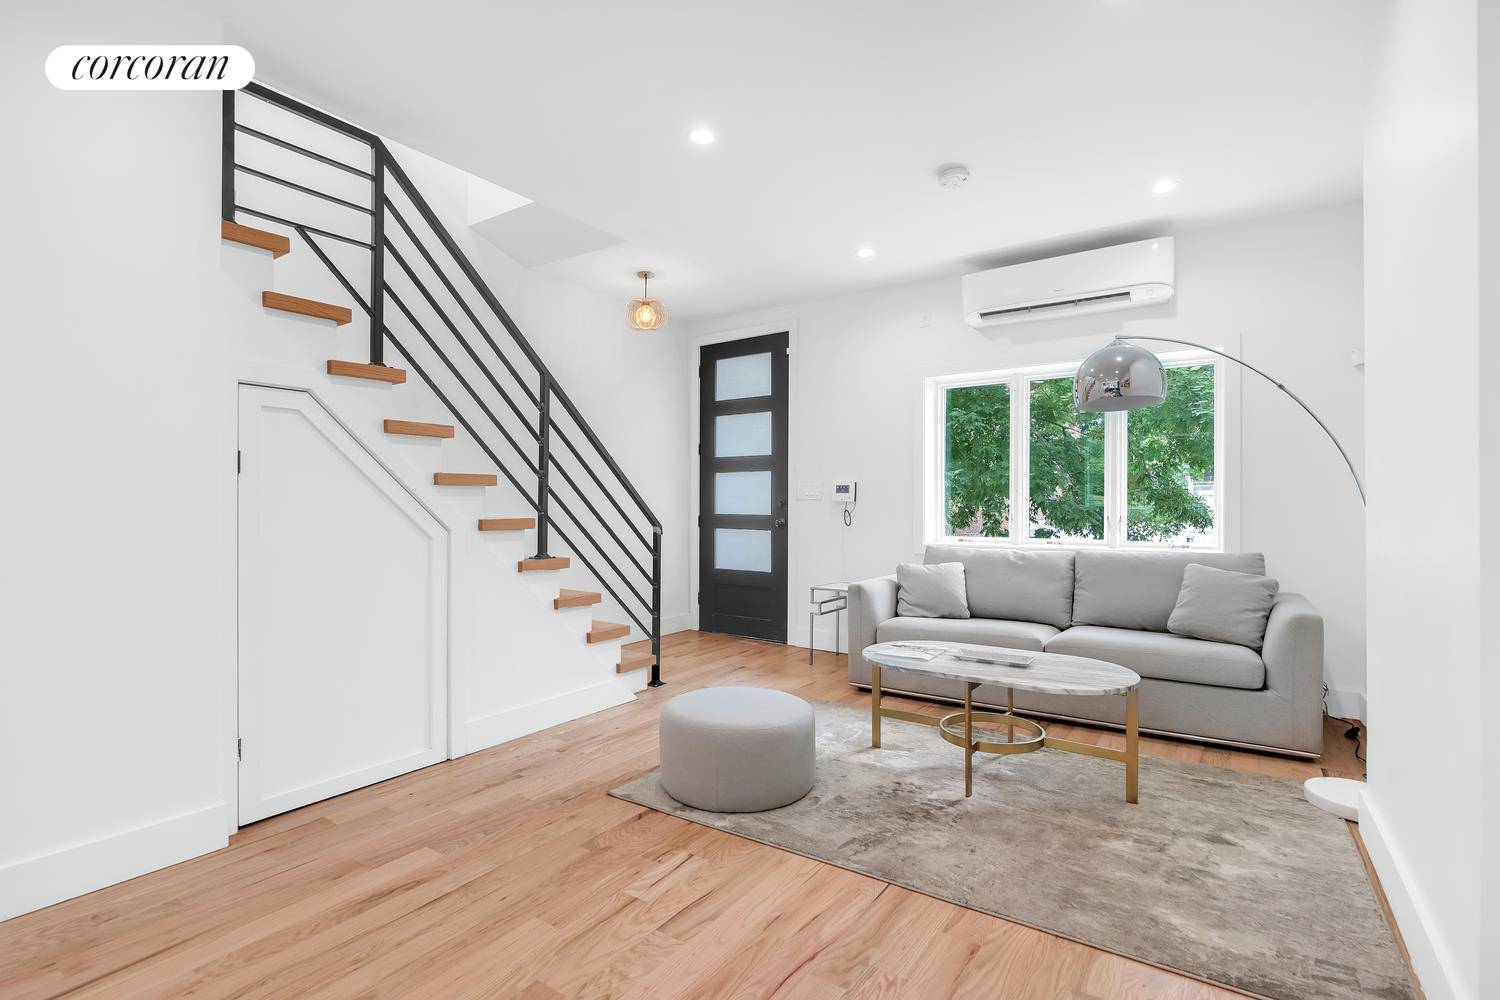 Unveiling 257 19th Street ; a bespoke, two family townhouse meticulously and elegantly renovated to perfectly combine classic townhouse living with today's modern lifestyle.